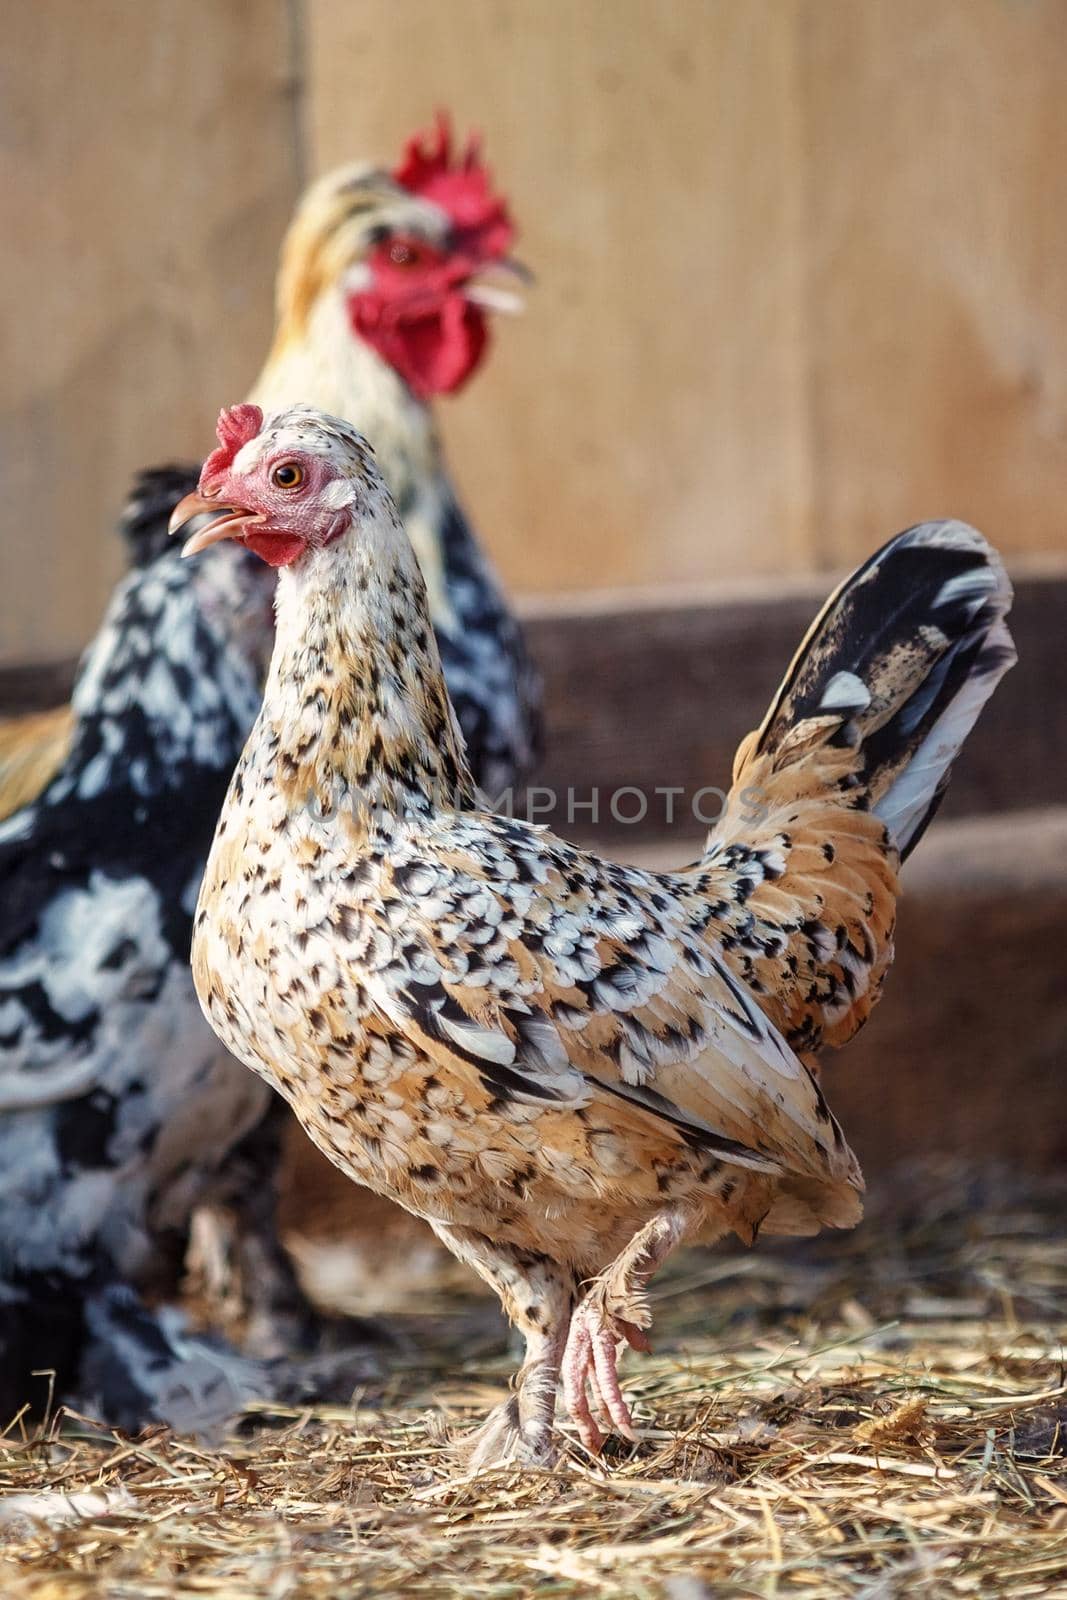 A speckled mini hen in a henhouse, blurred view of rooster in the background. by Lincikas